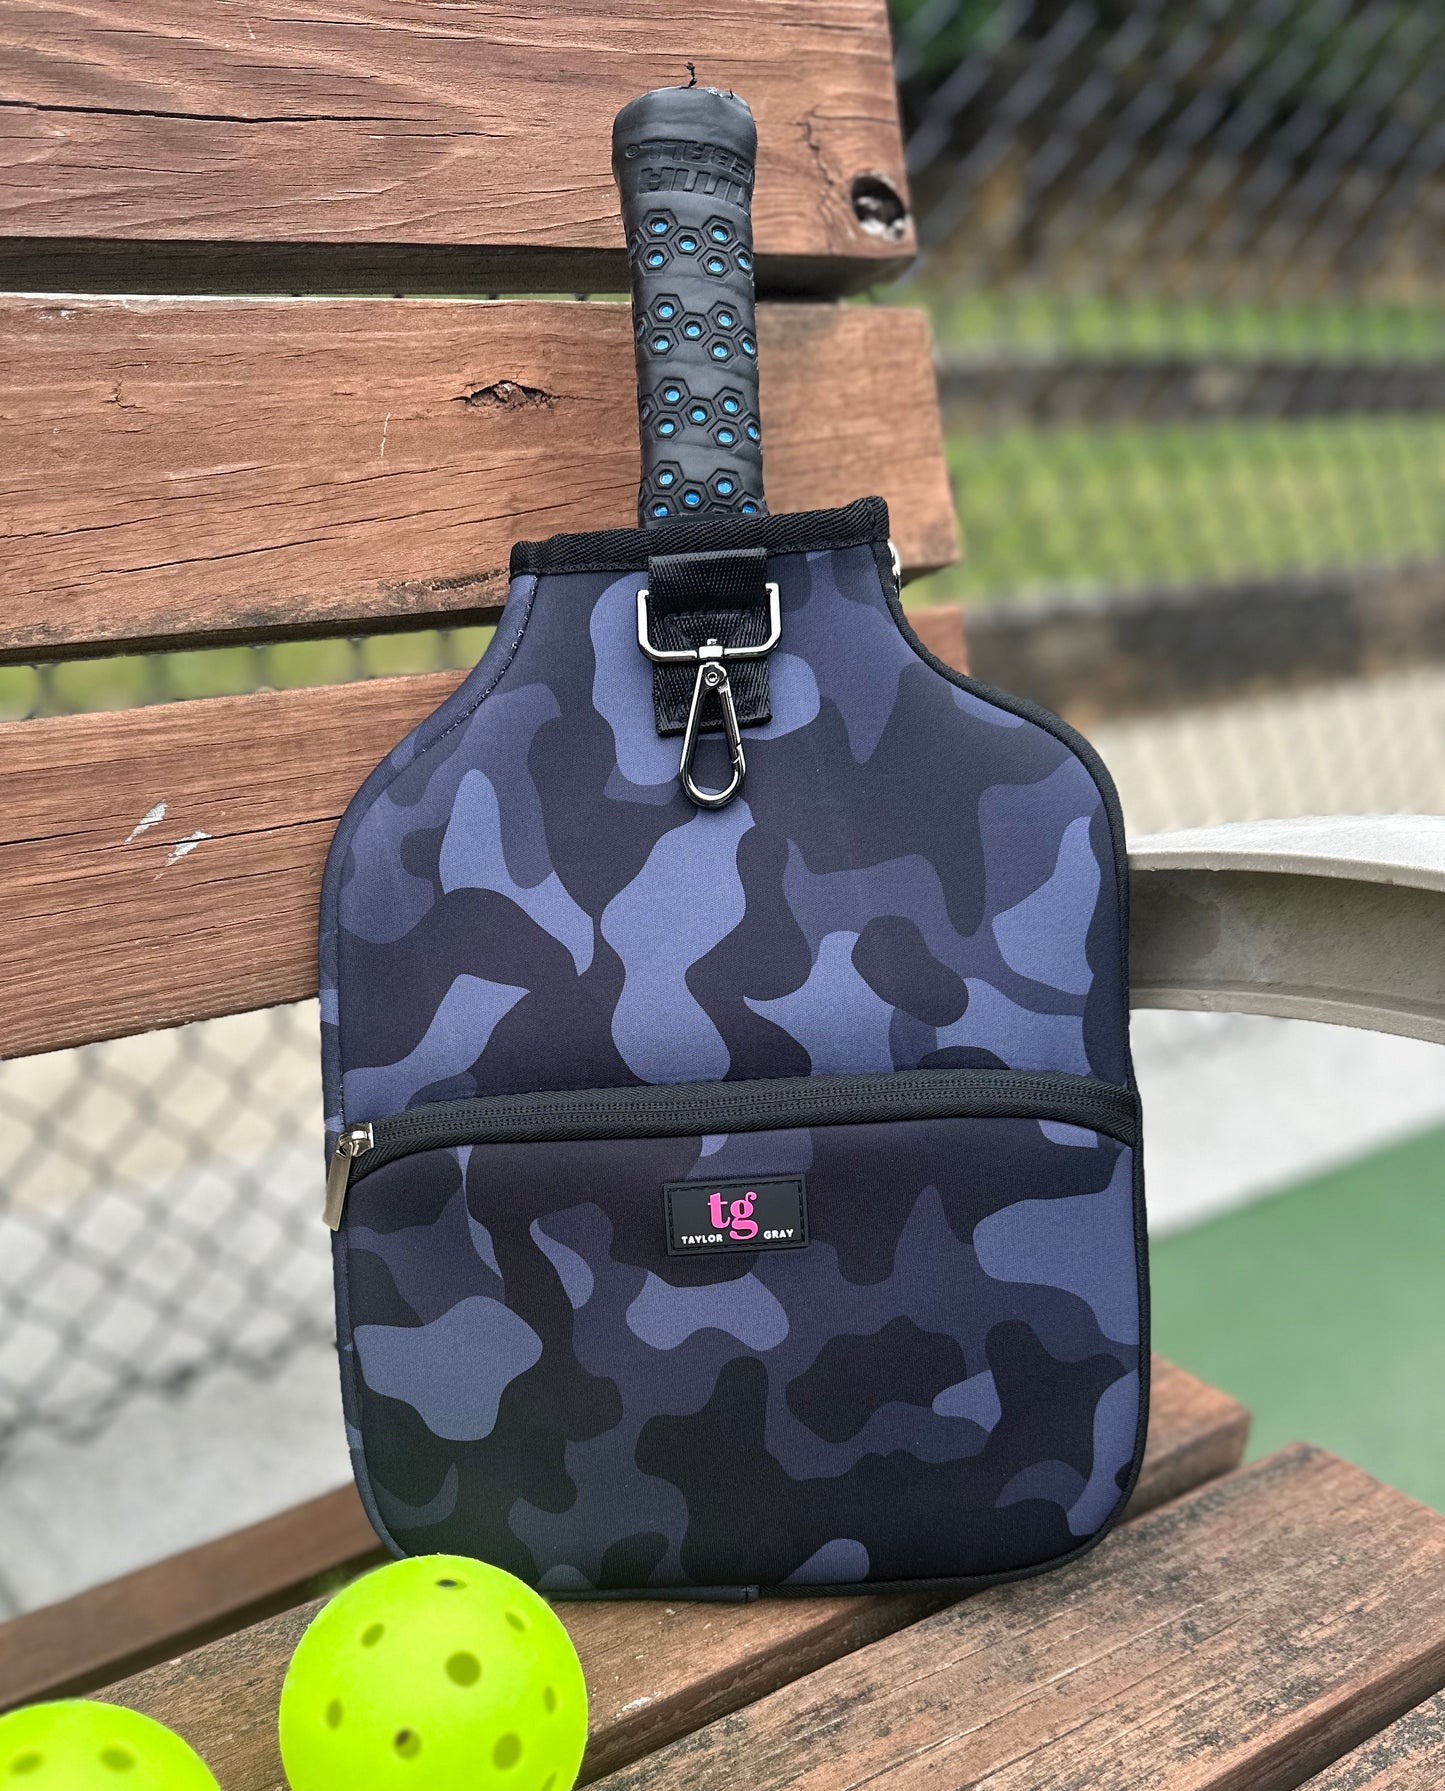 The Midnight Camo Pickleball Paddle Cover